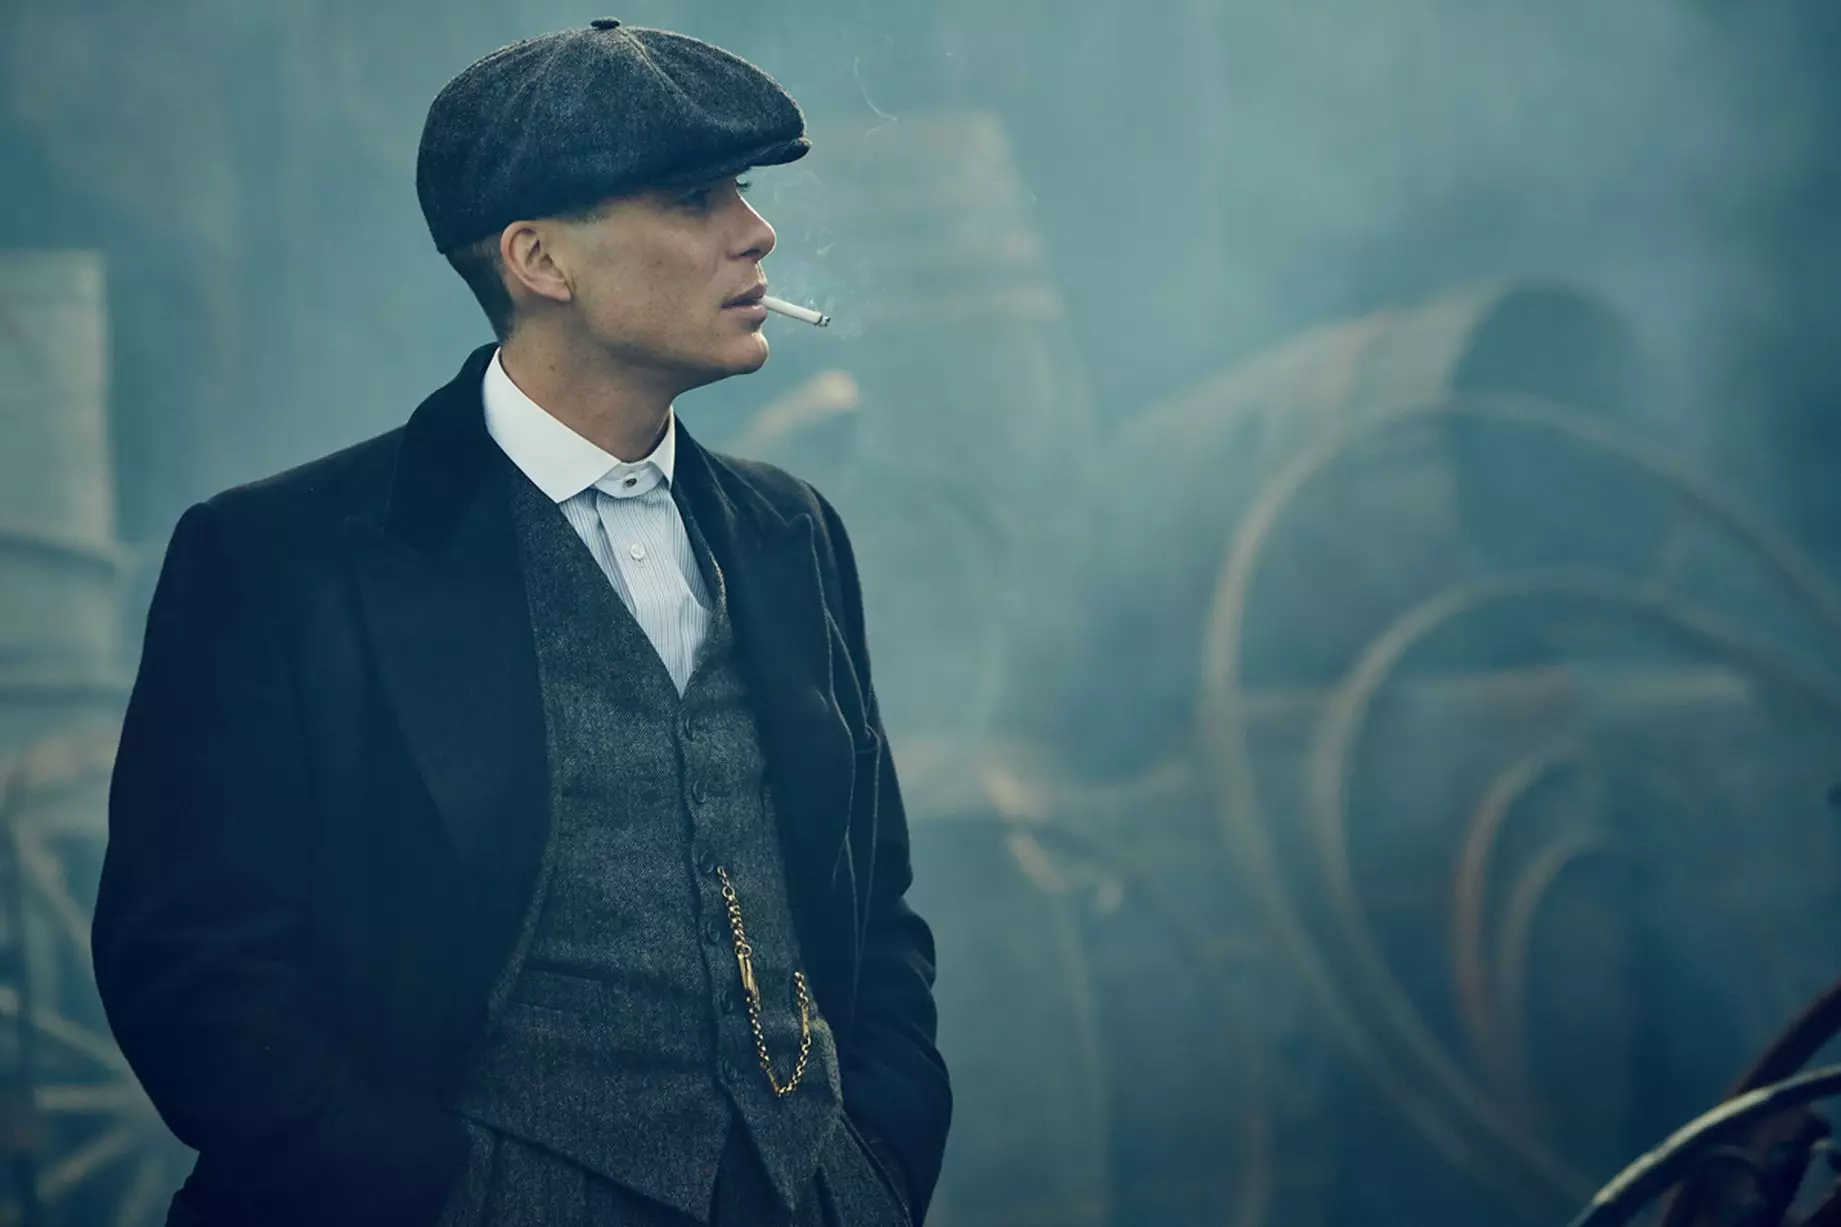 Cillian Murphy stars as Tommy Shelby in Peaky Blinders.